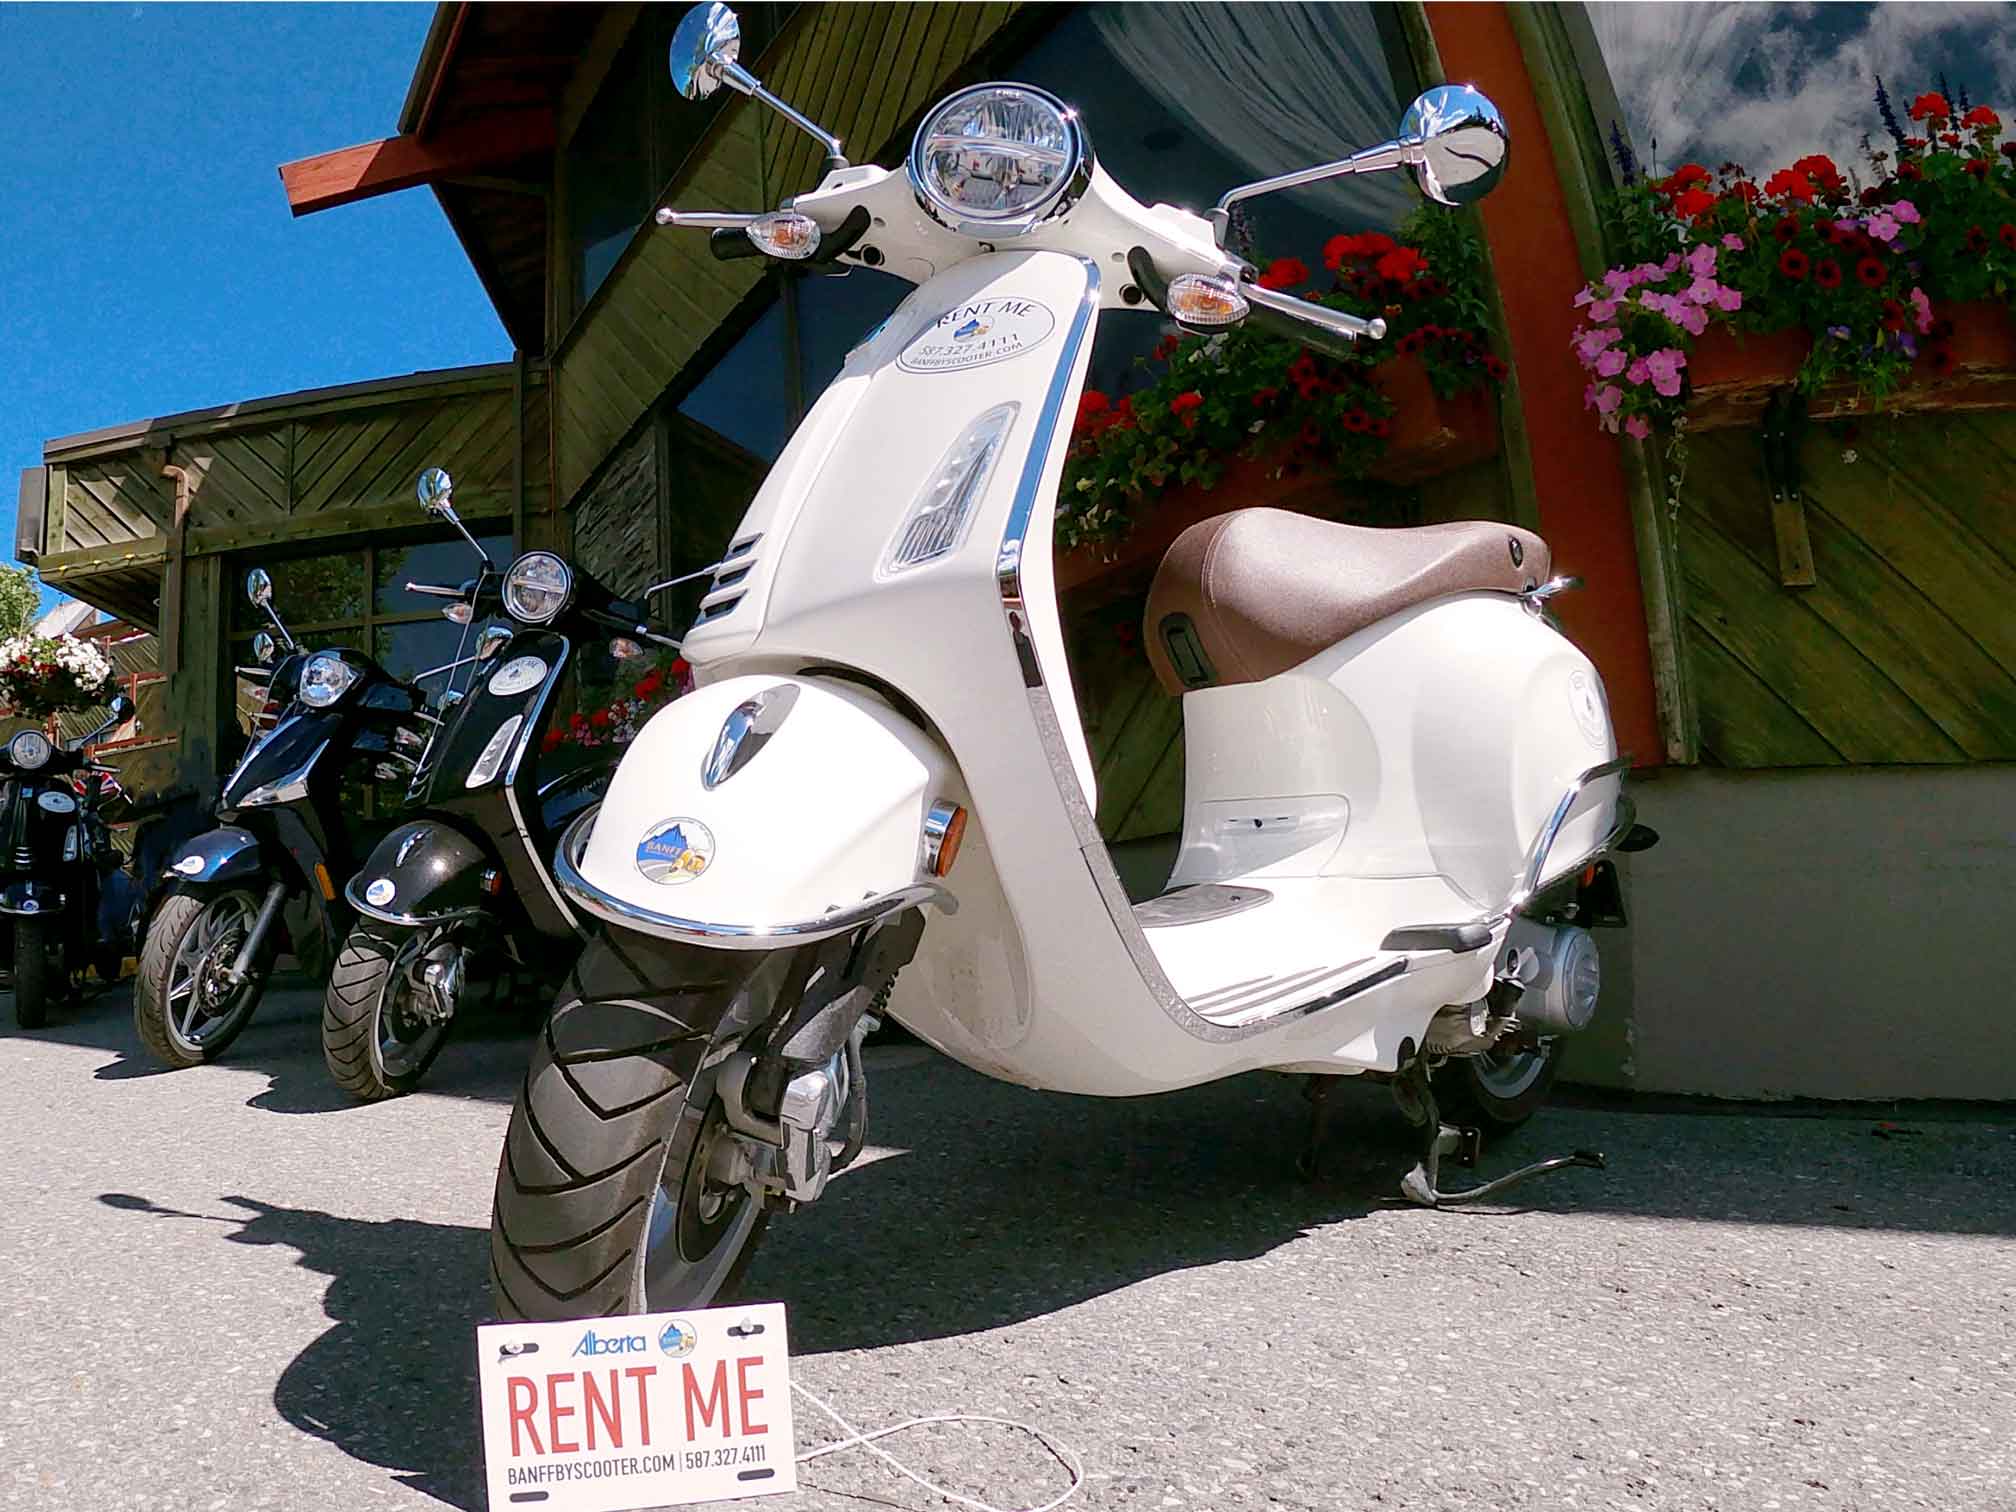 Scooters lined off with rent me sign at Banff By Scooter